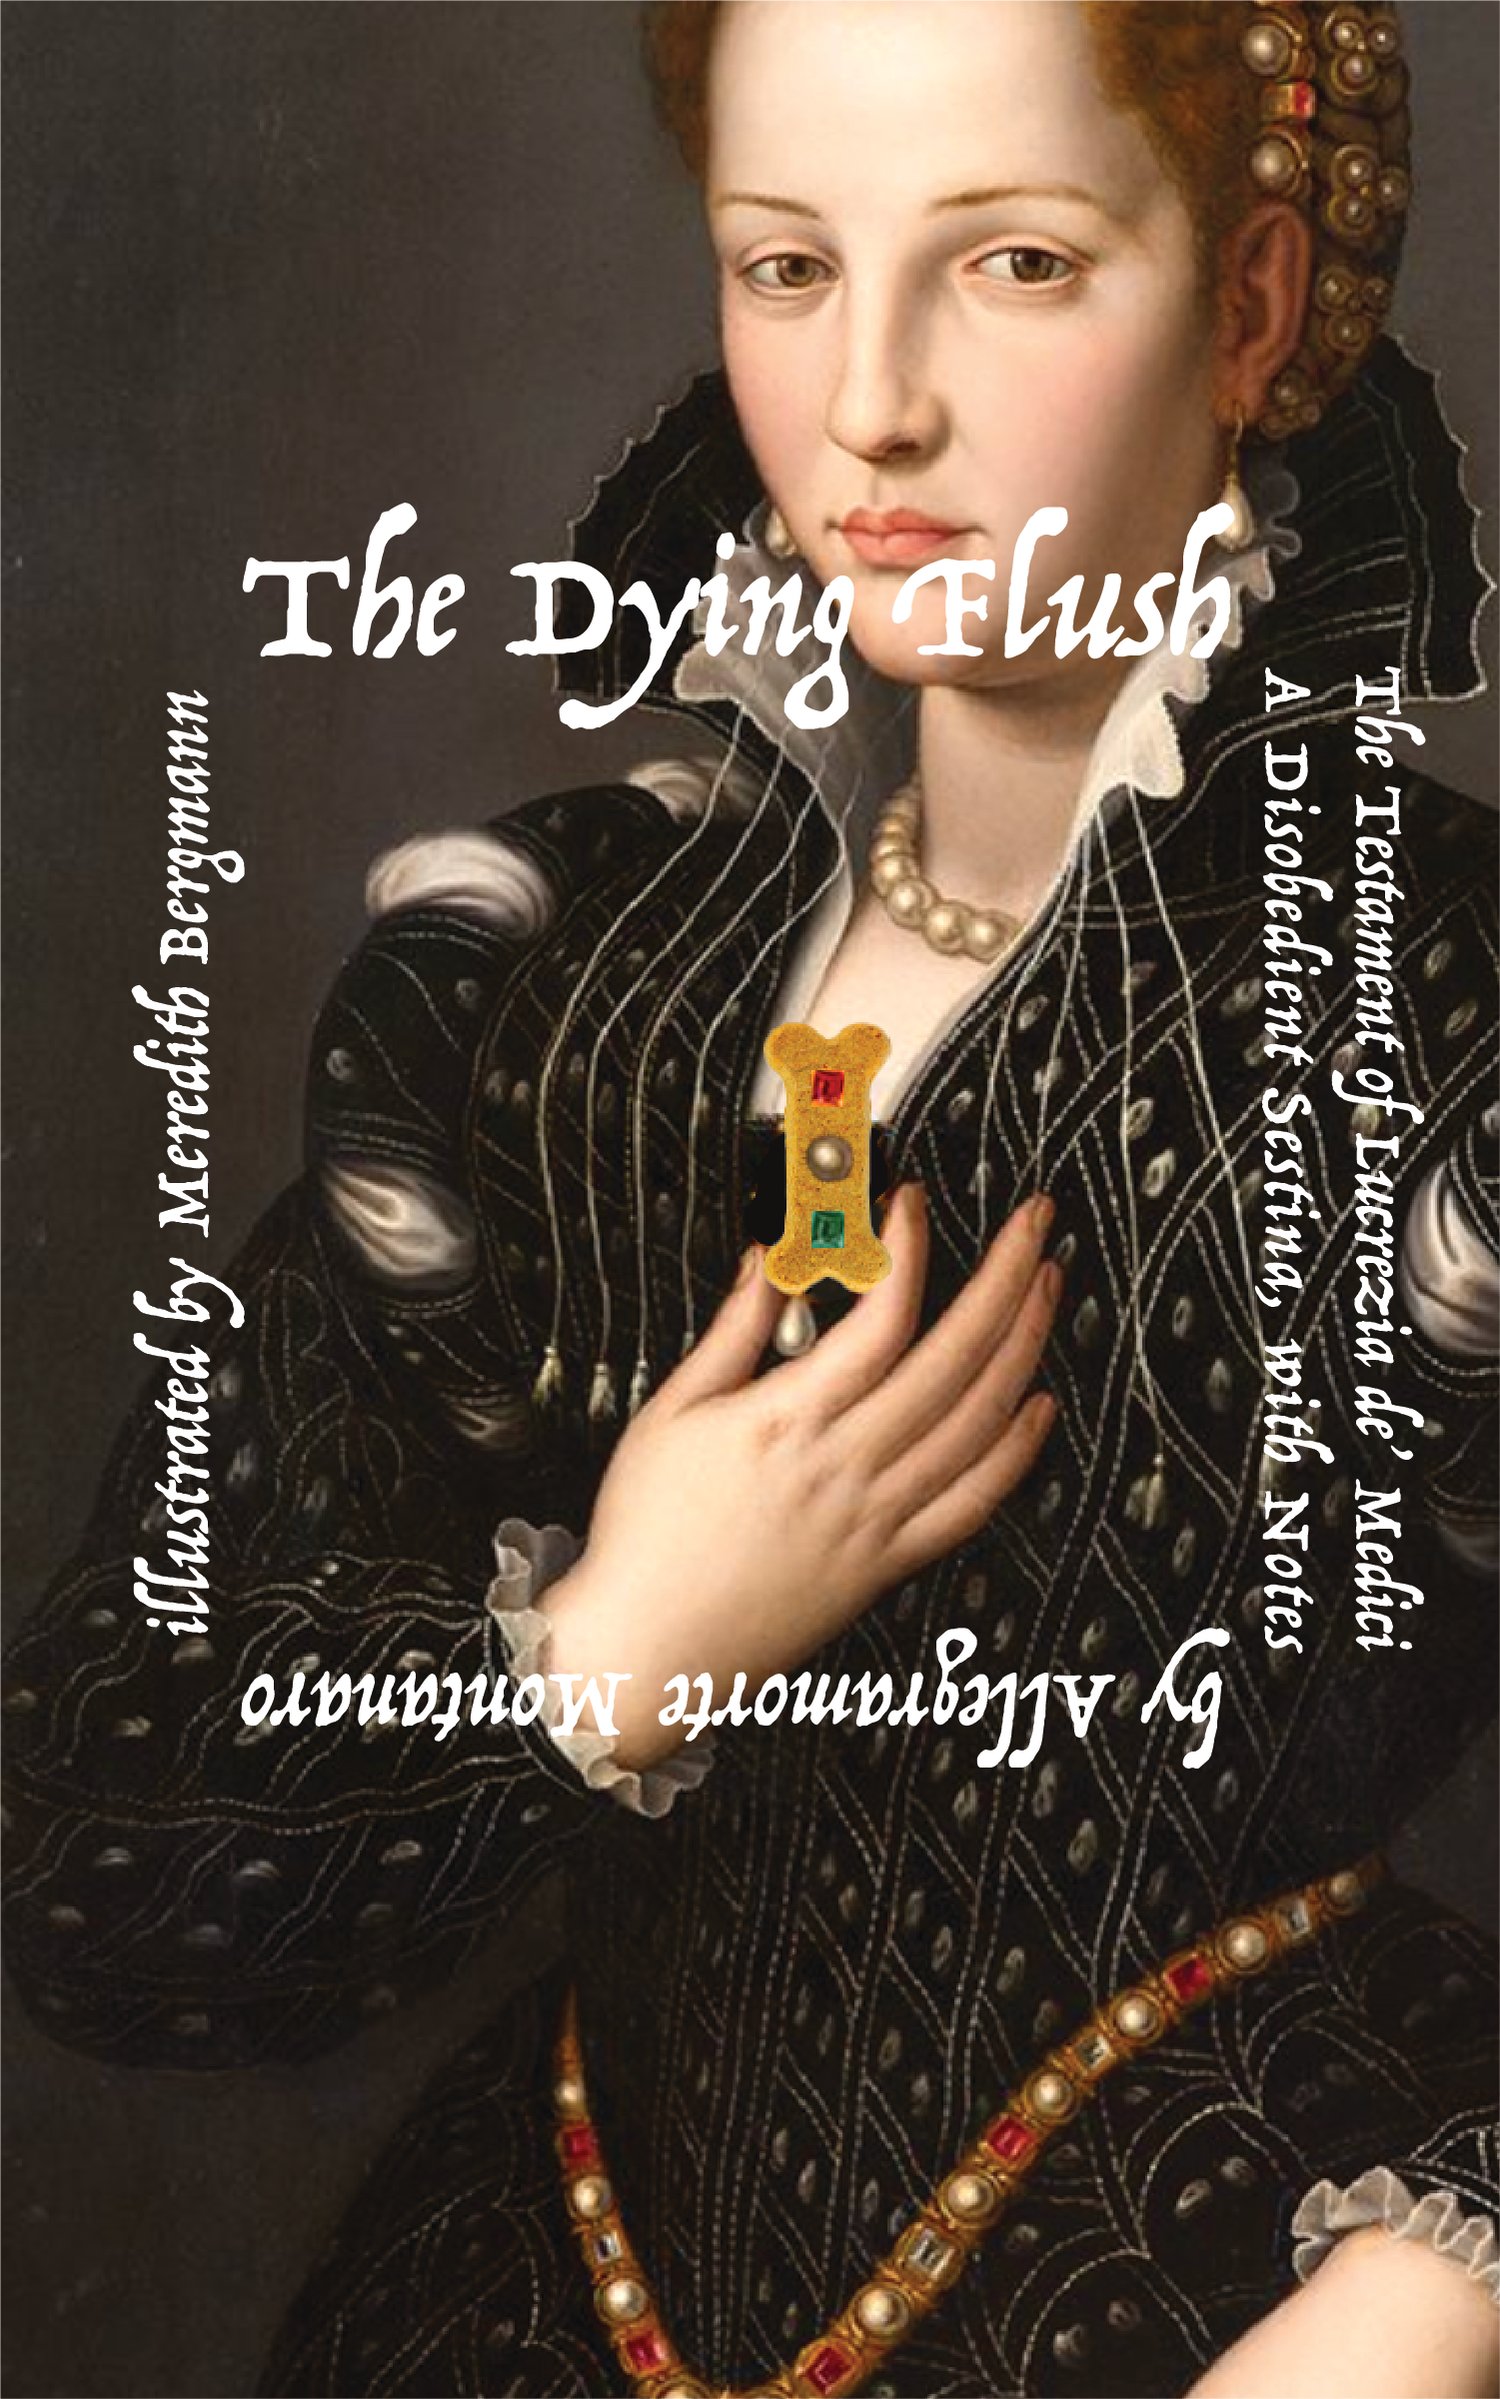 THE DYING FLUSH by Meredith Bergmann